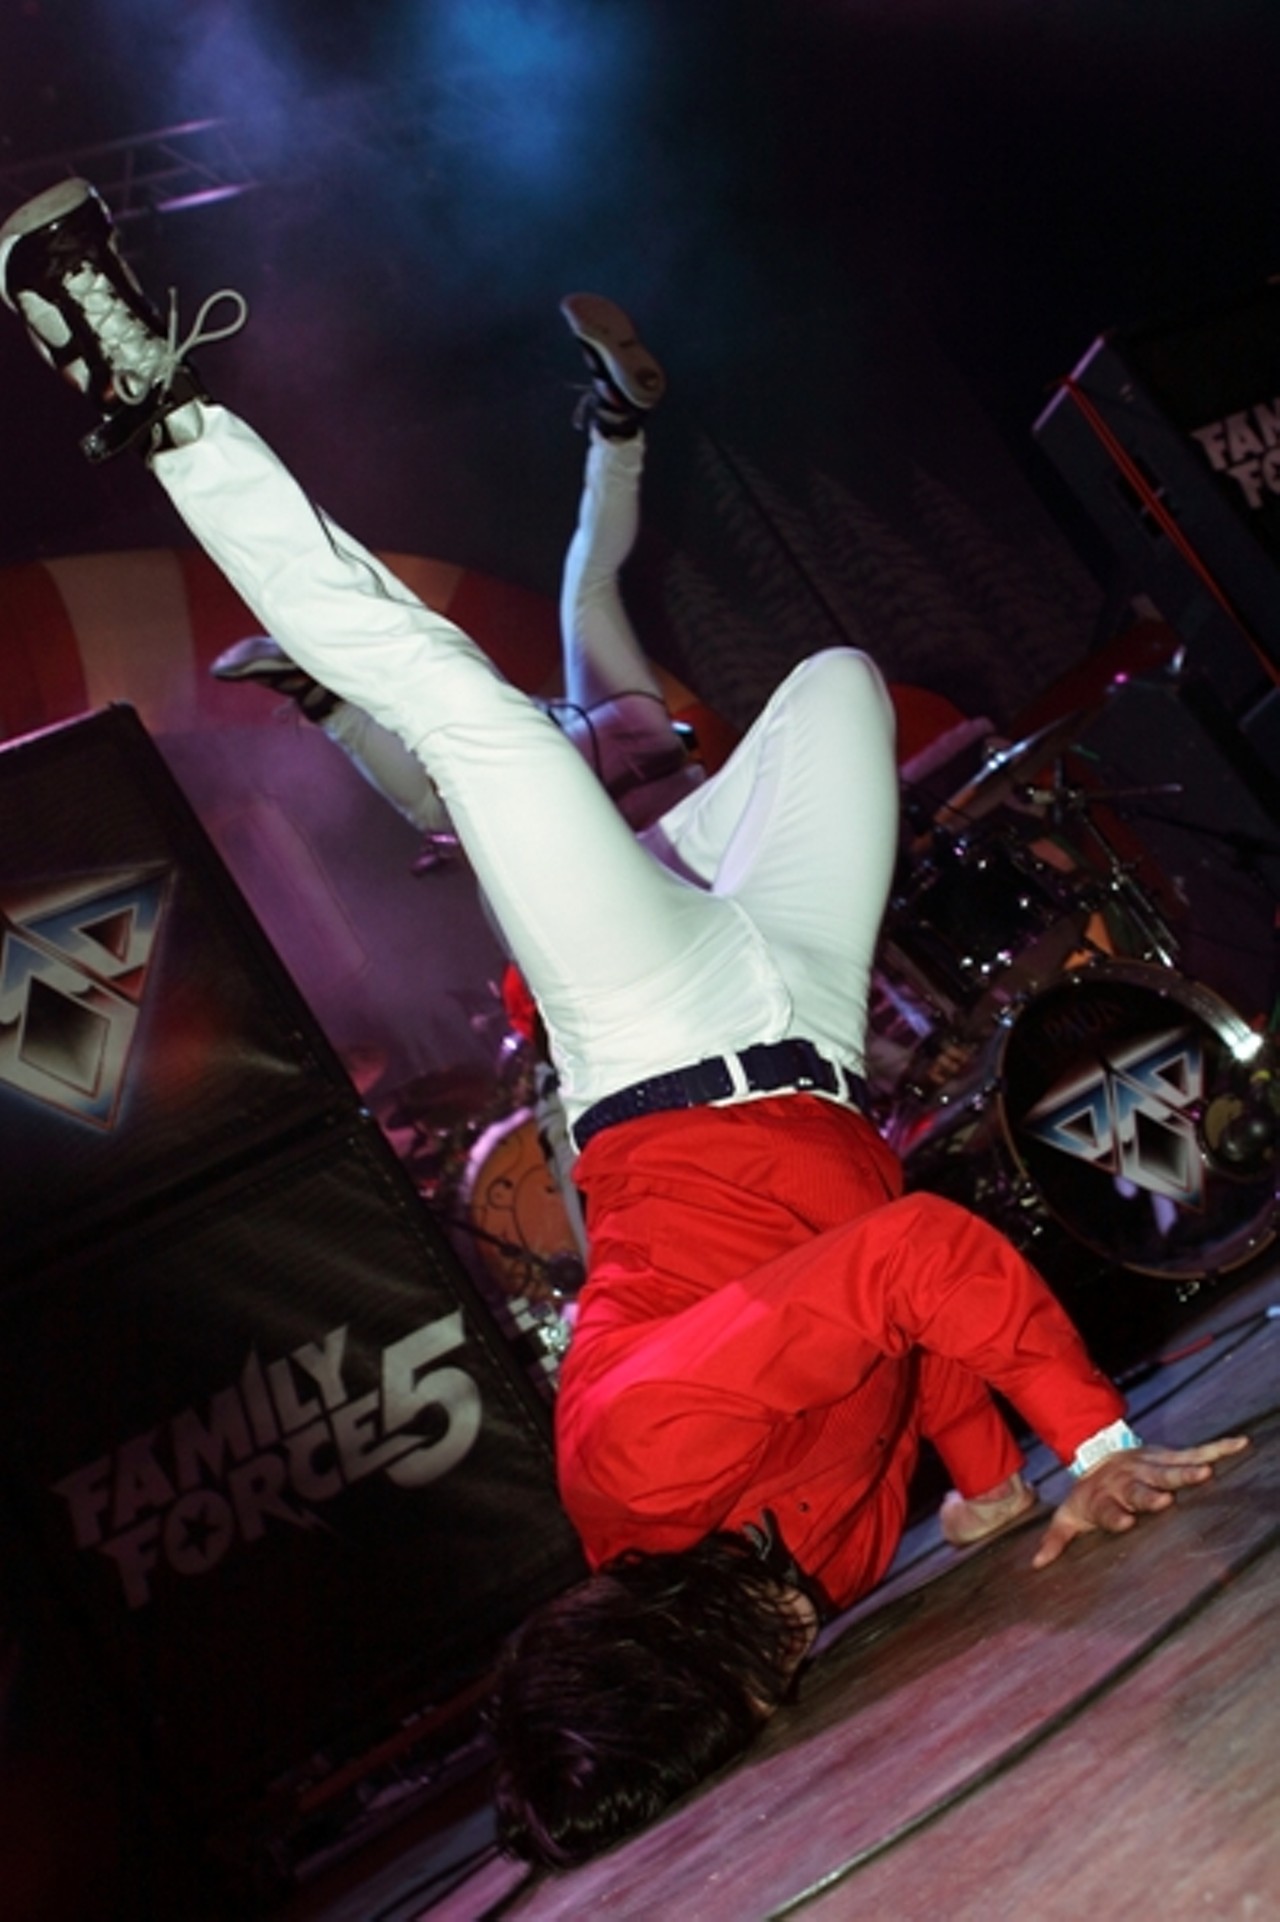 Family Force 5. Read the concert review in A to Z, the RFT music blog.